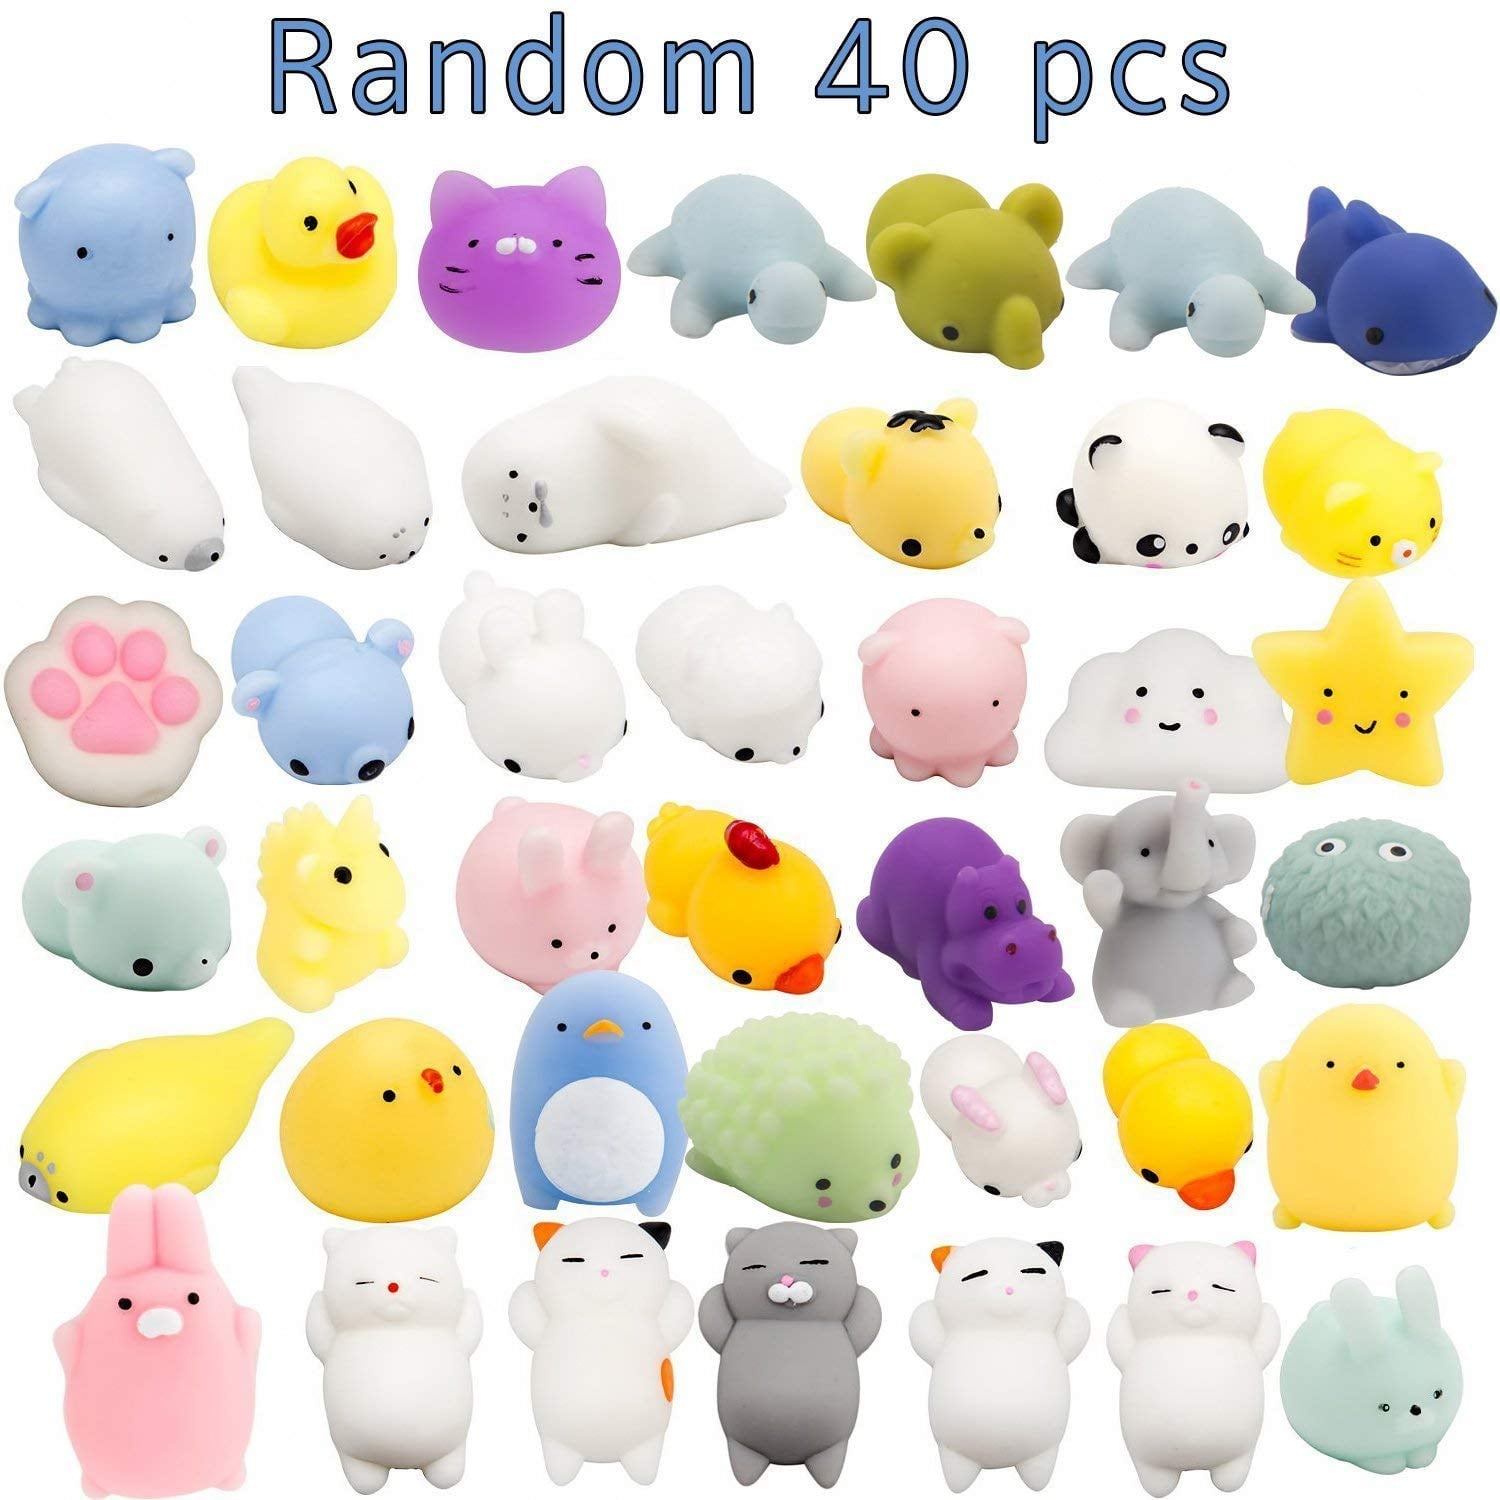 Classroom prizes Carnival Prizes MGparty 40 Pcs Mochi Squishies Bulk Animal Squishy Toys for Kids Party Favors Goodie Bag Stuffers Mini Squishies Stress Relief Toys for Girls Boys Birthday Gifts 